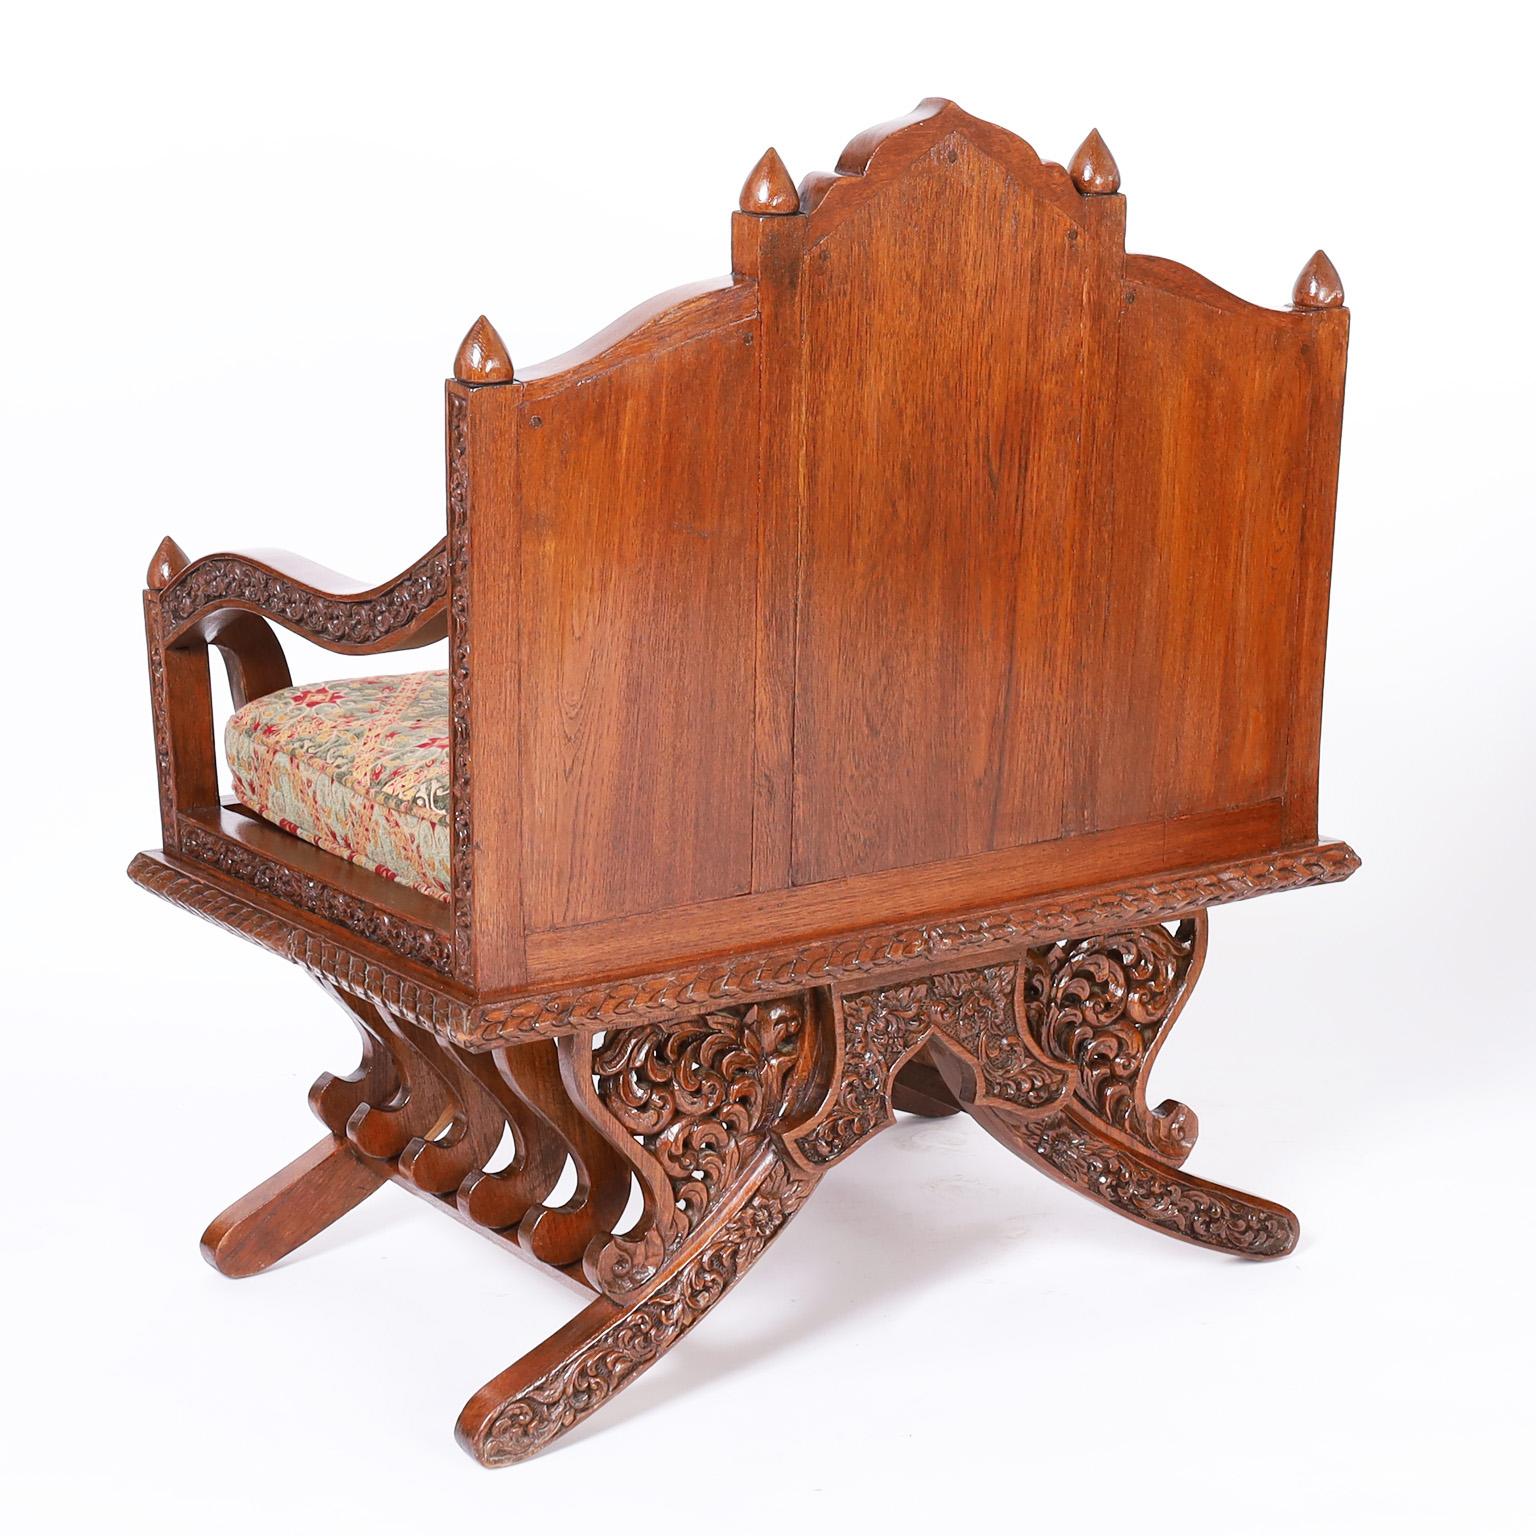 20th Century Pair of Thai Rosewood Elephant Howdah Saddle Style Chairs For Sale